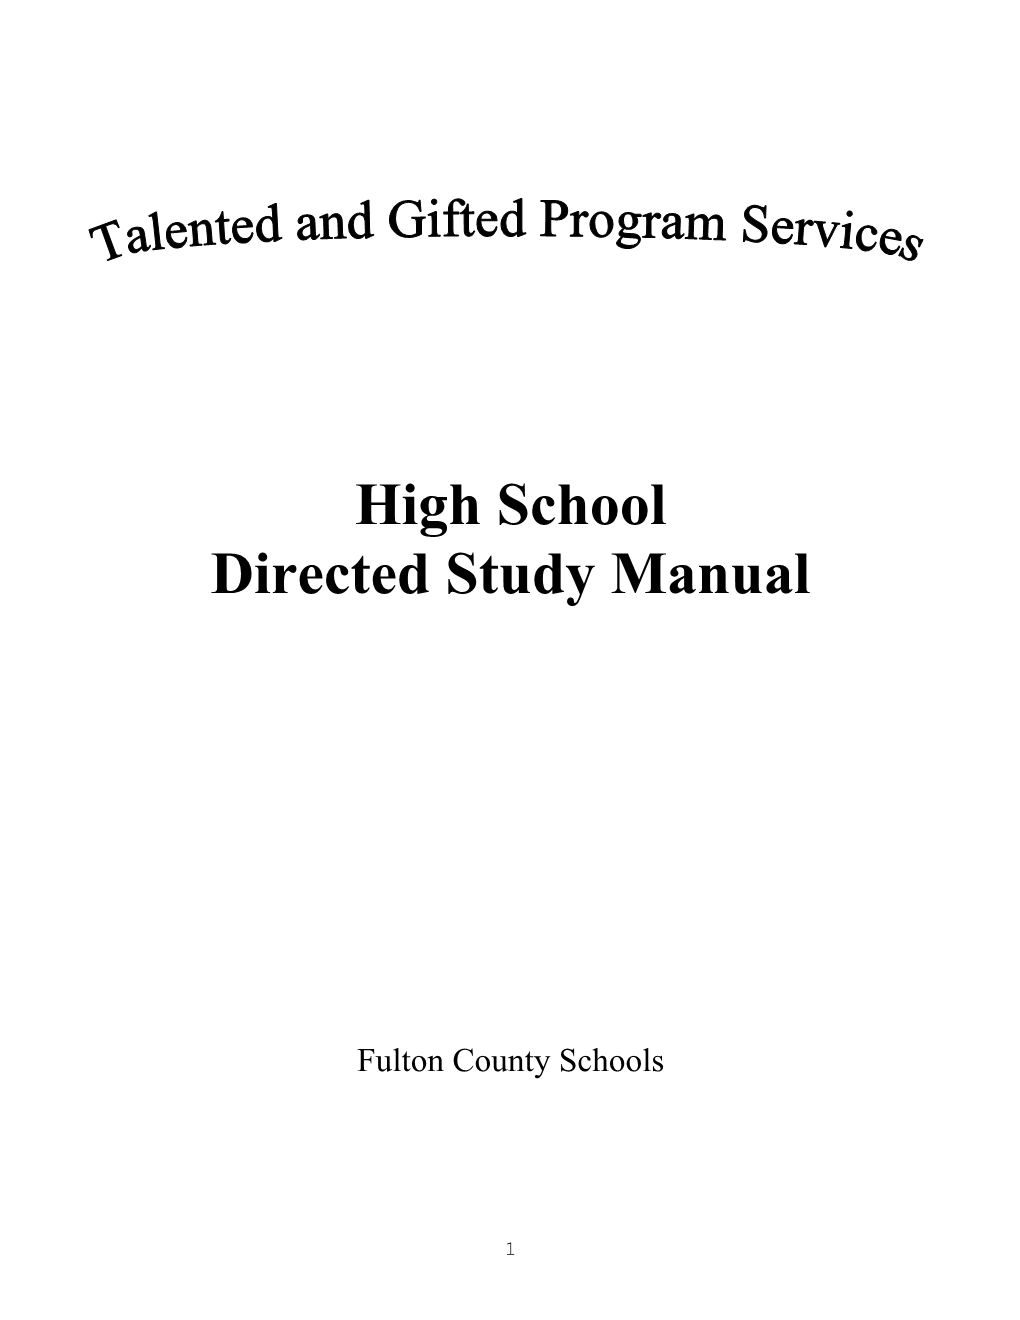 Directed Study Manual for High School